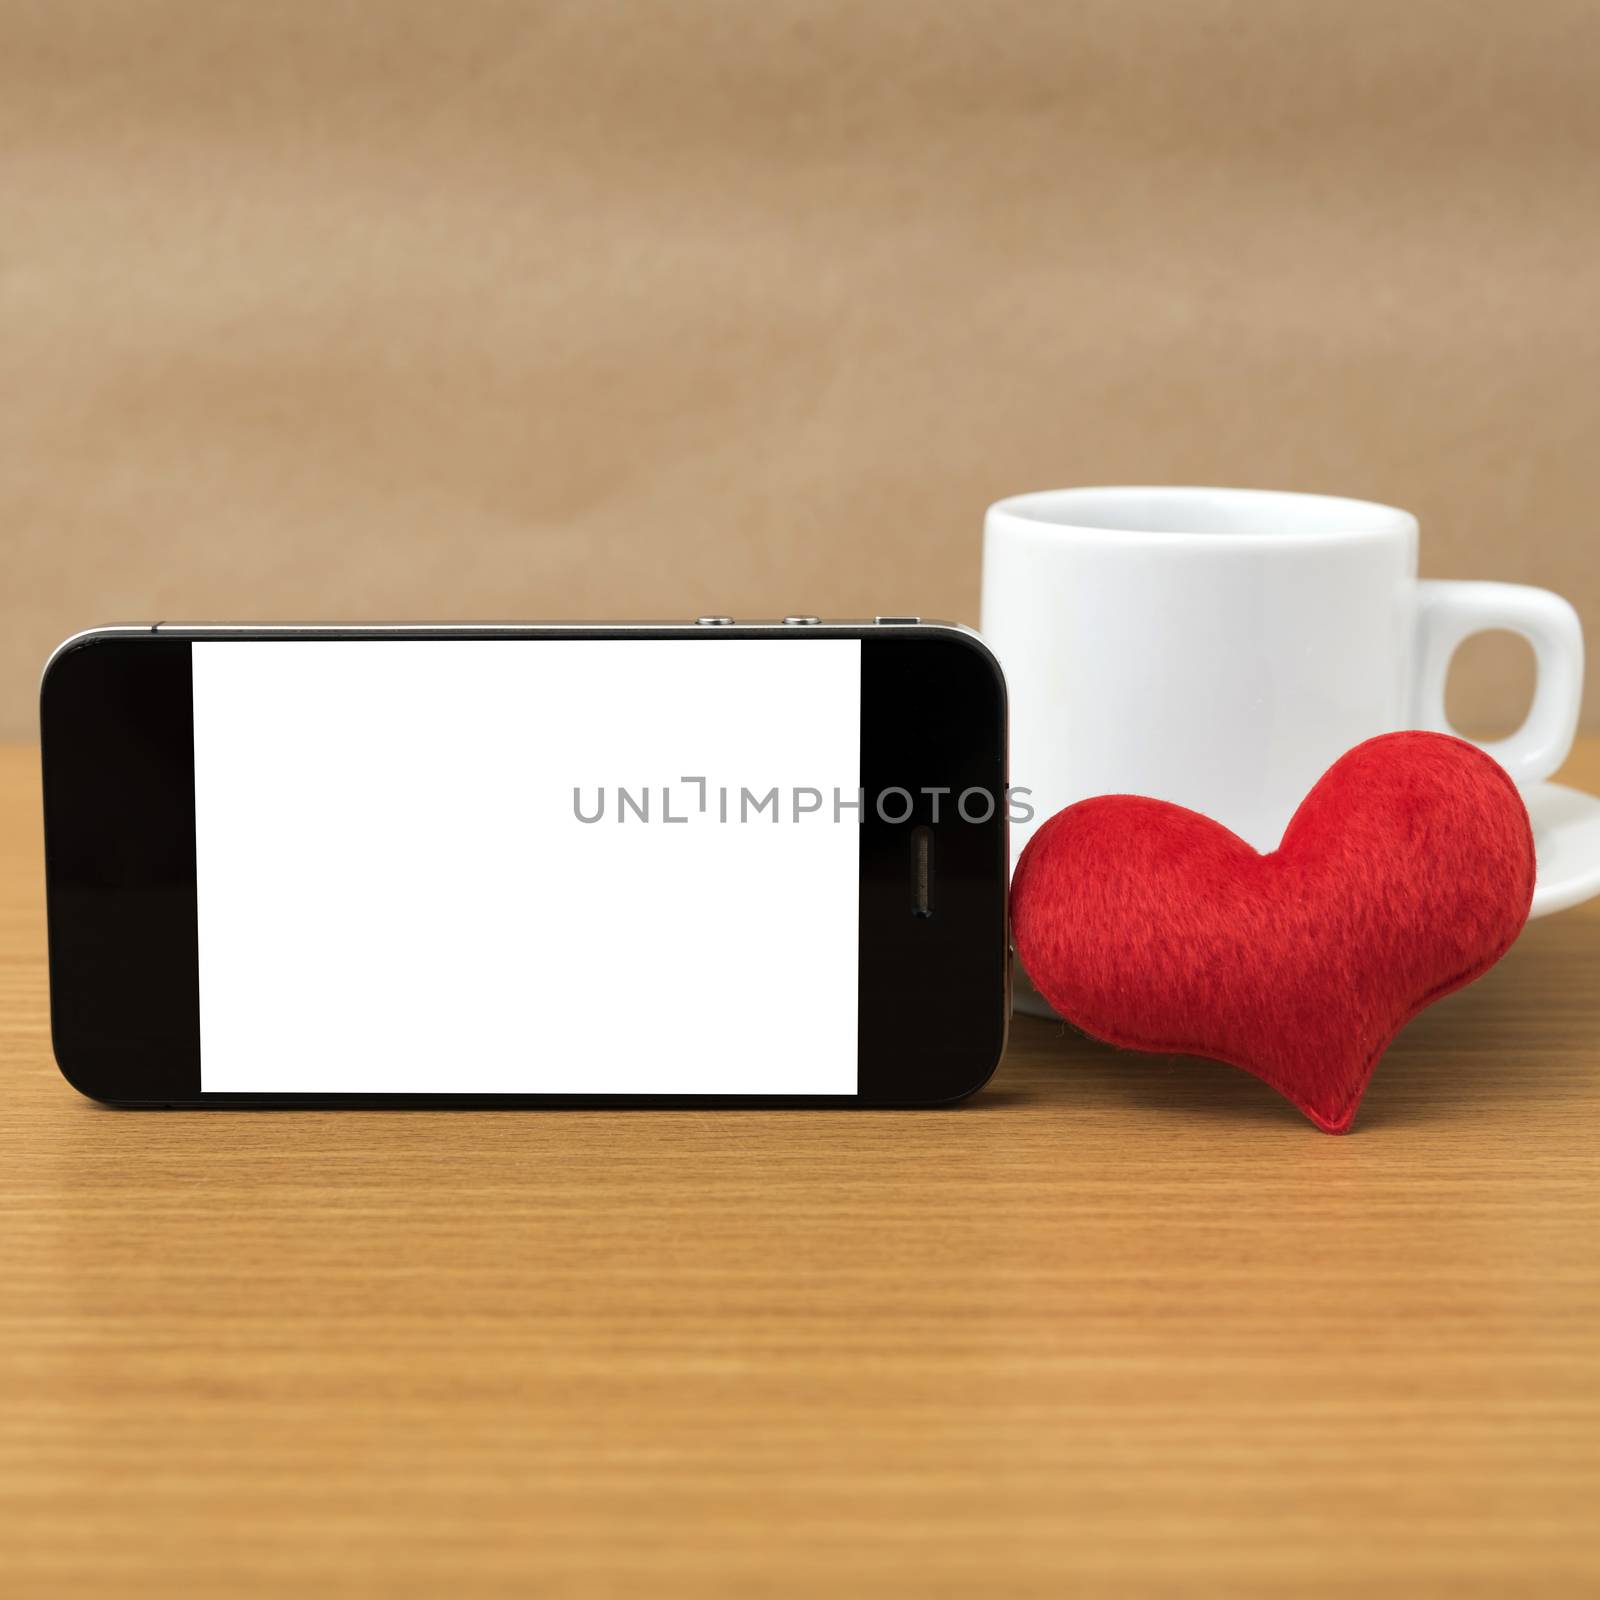 coffee cup and phone and heart on wood background